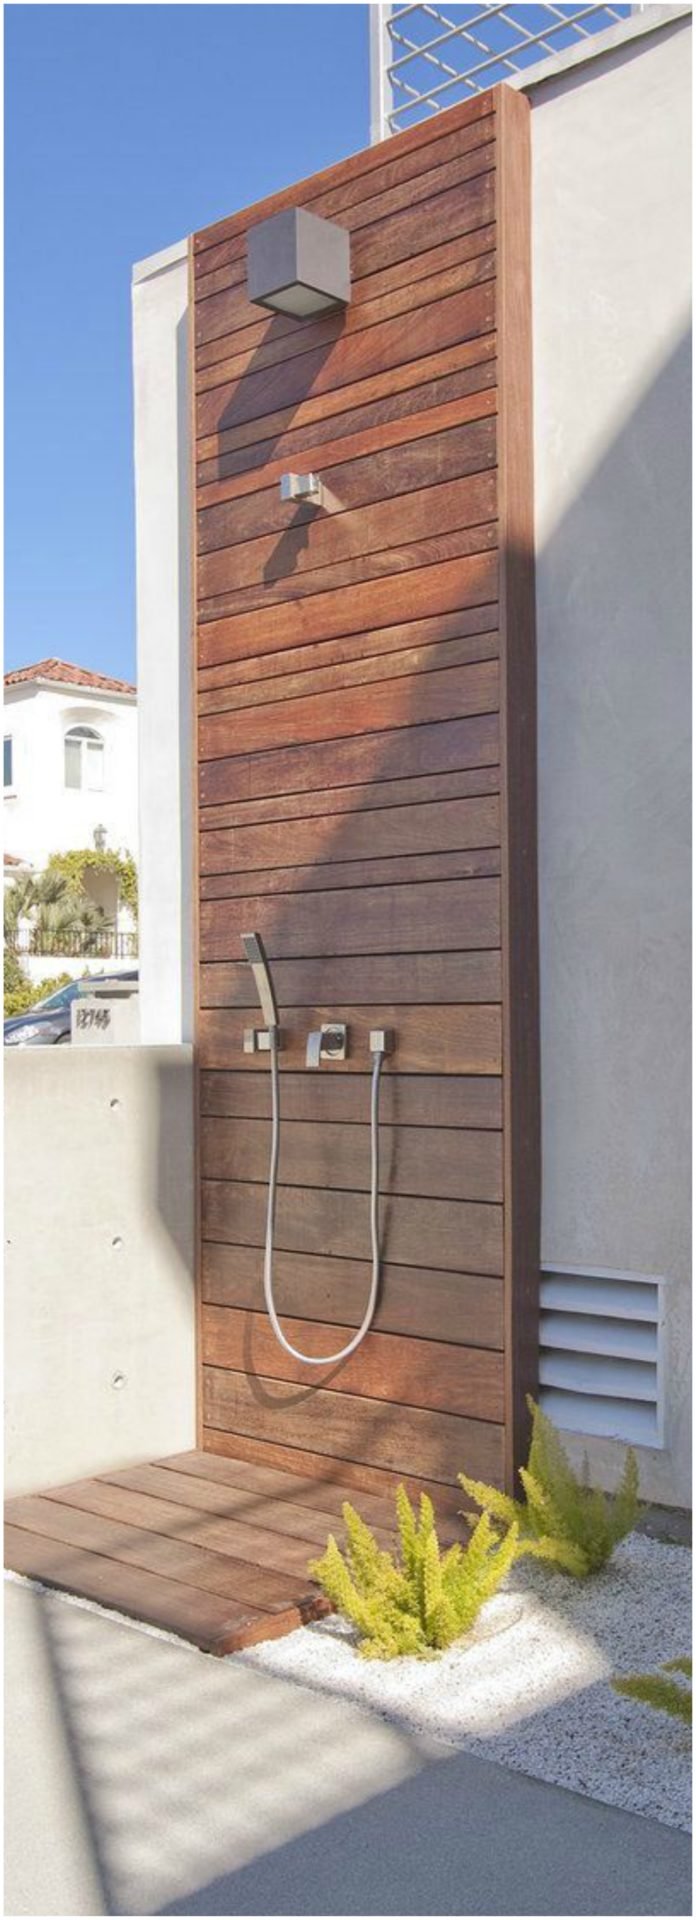 25 Outdoor Pool Showers To Get Inspired Before Your Home Renovation